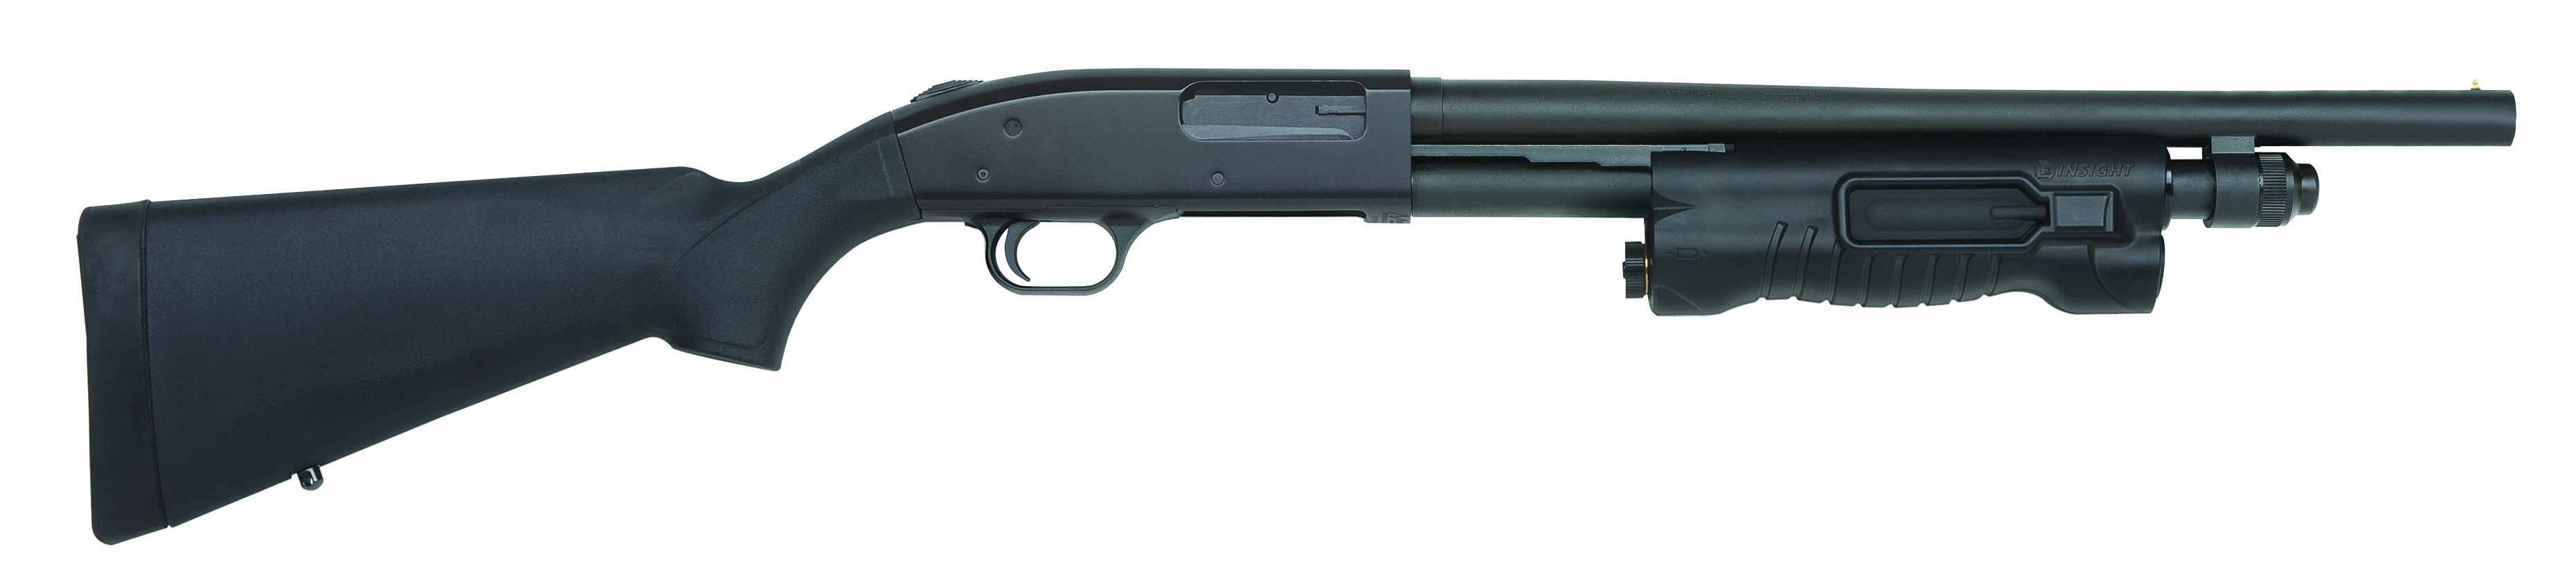 downloadable mossberg 500 owners manual